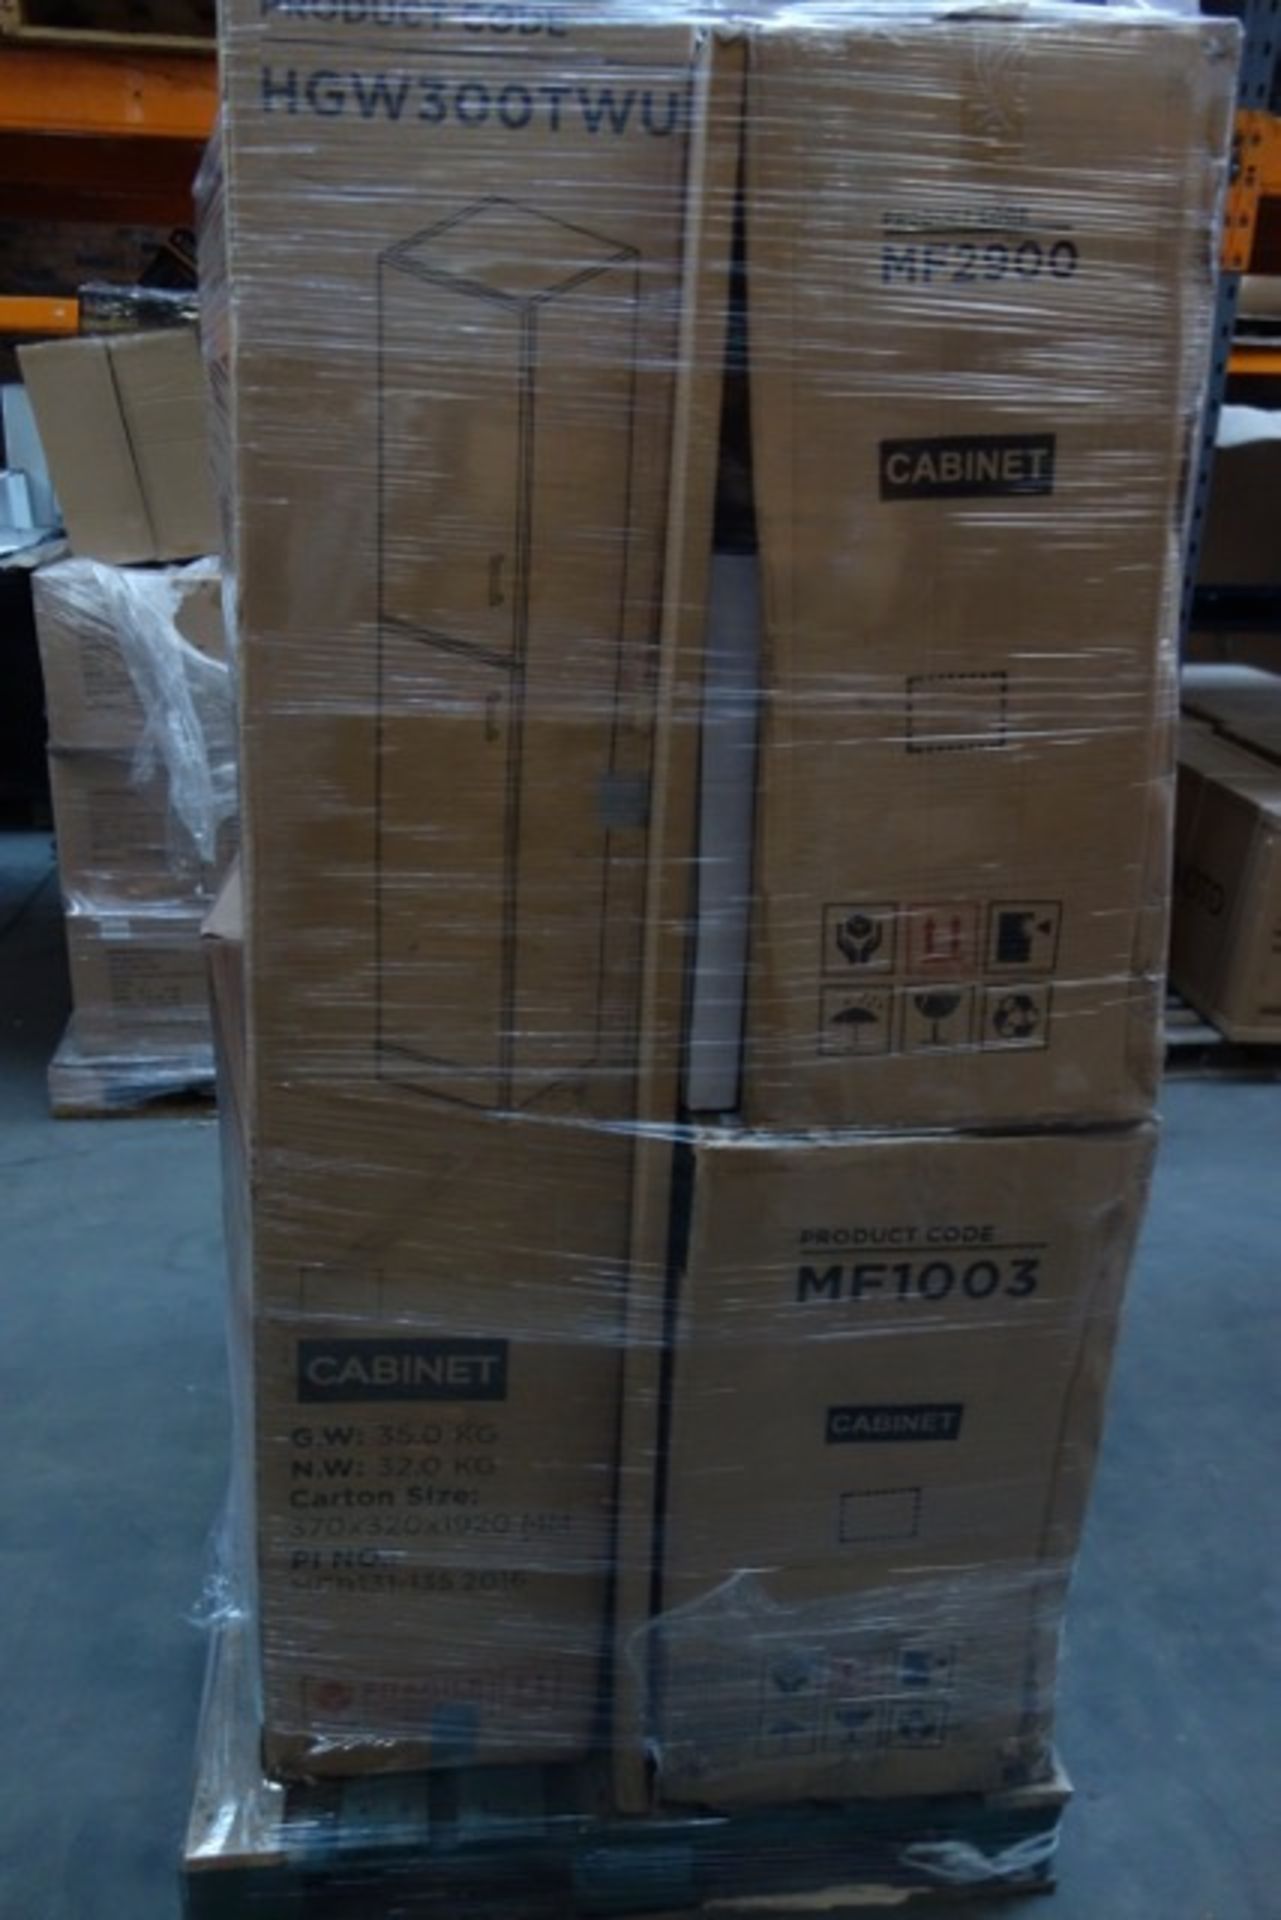 (NR51) PALLET CONTAINING 18 x ITEMS OF VARIOUS BATHROOM STOCK TO INCLUDE: VANITY UNIT, TOILET - Image 2 of 4